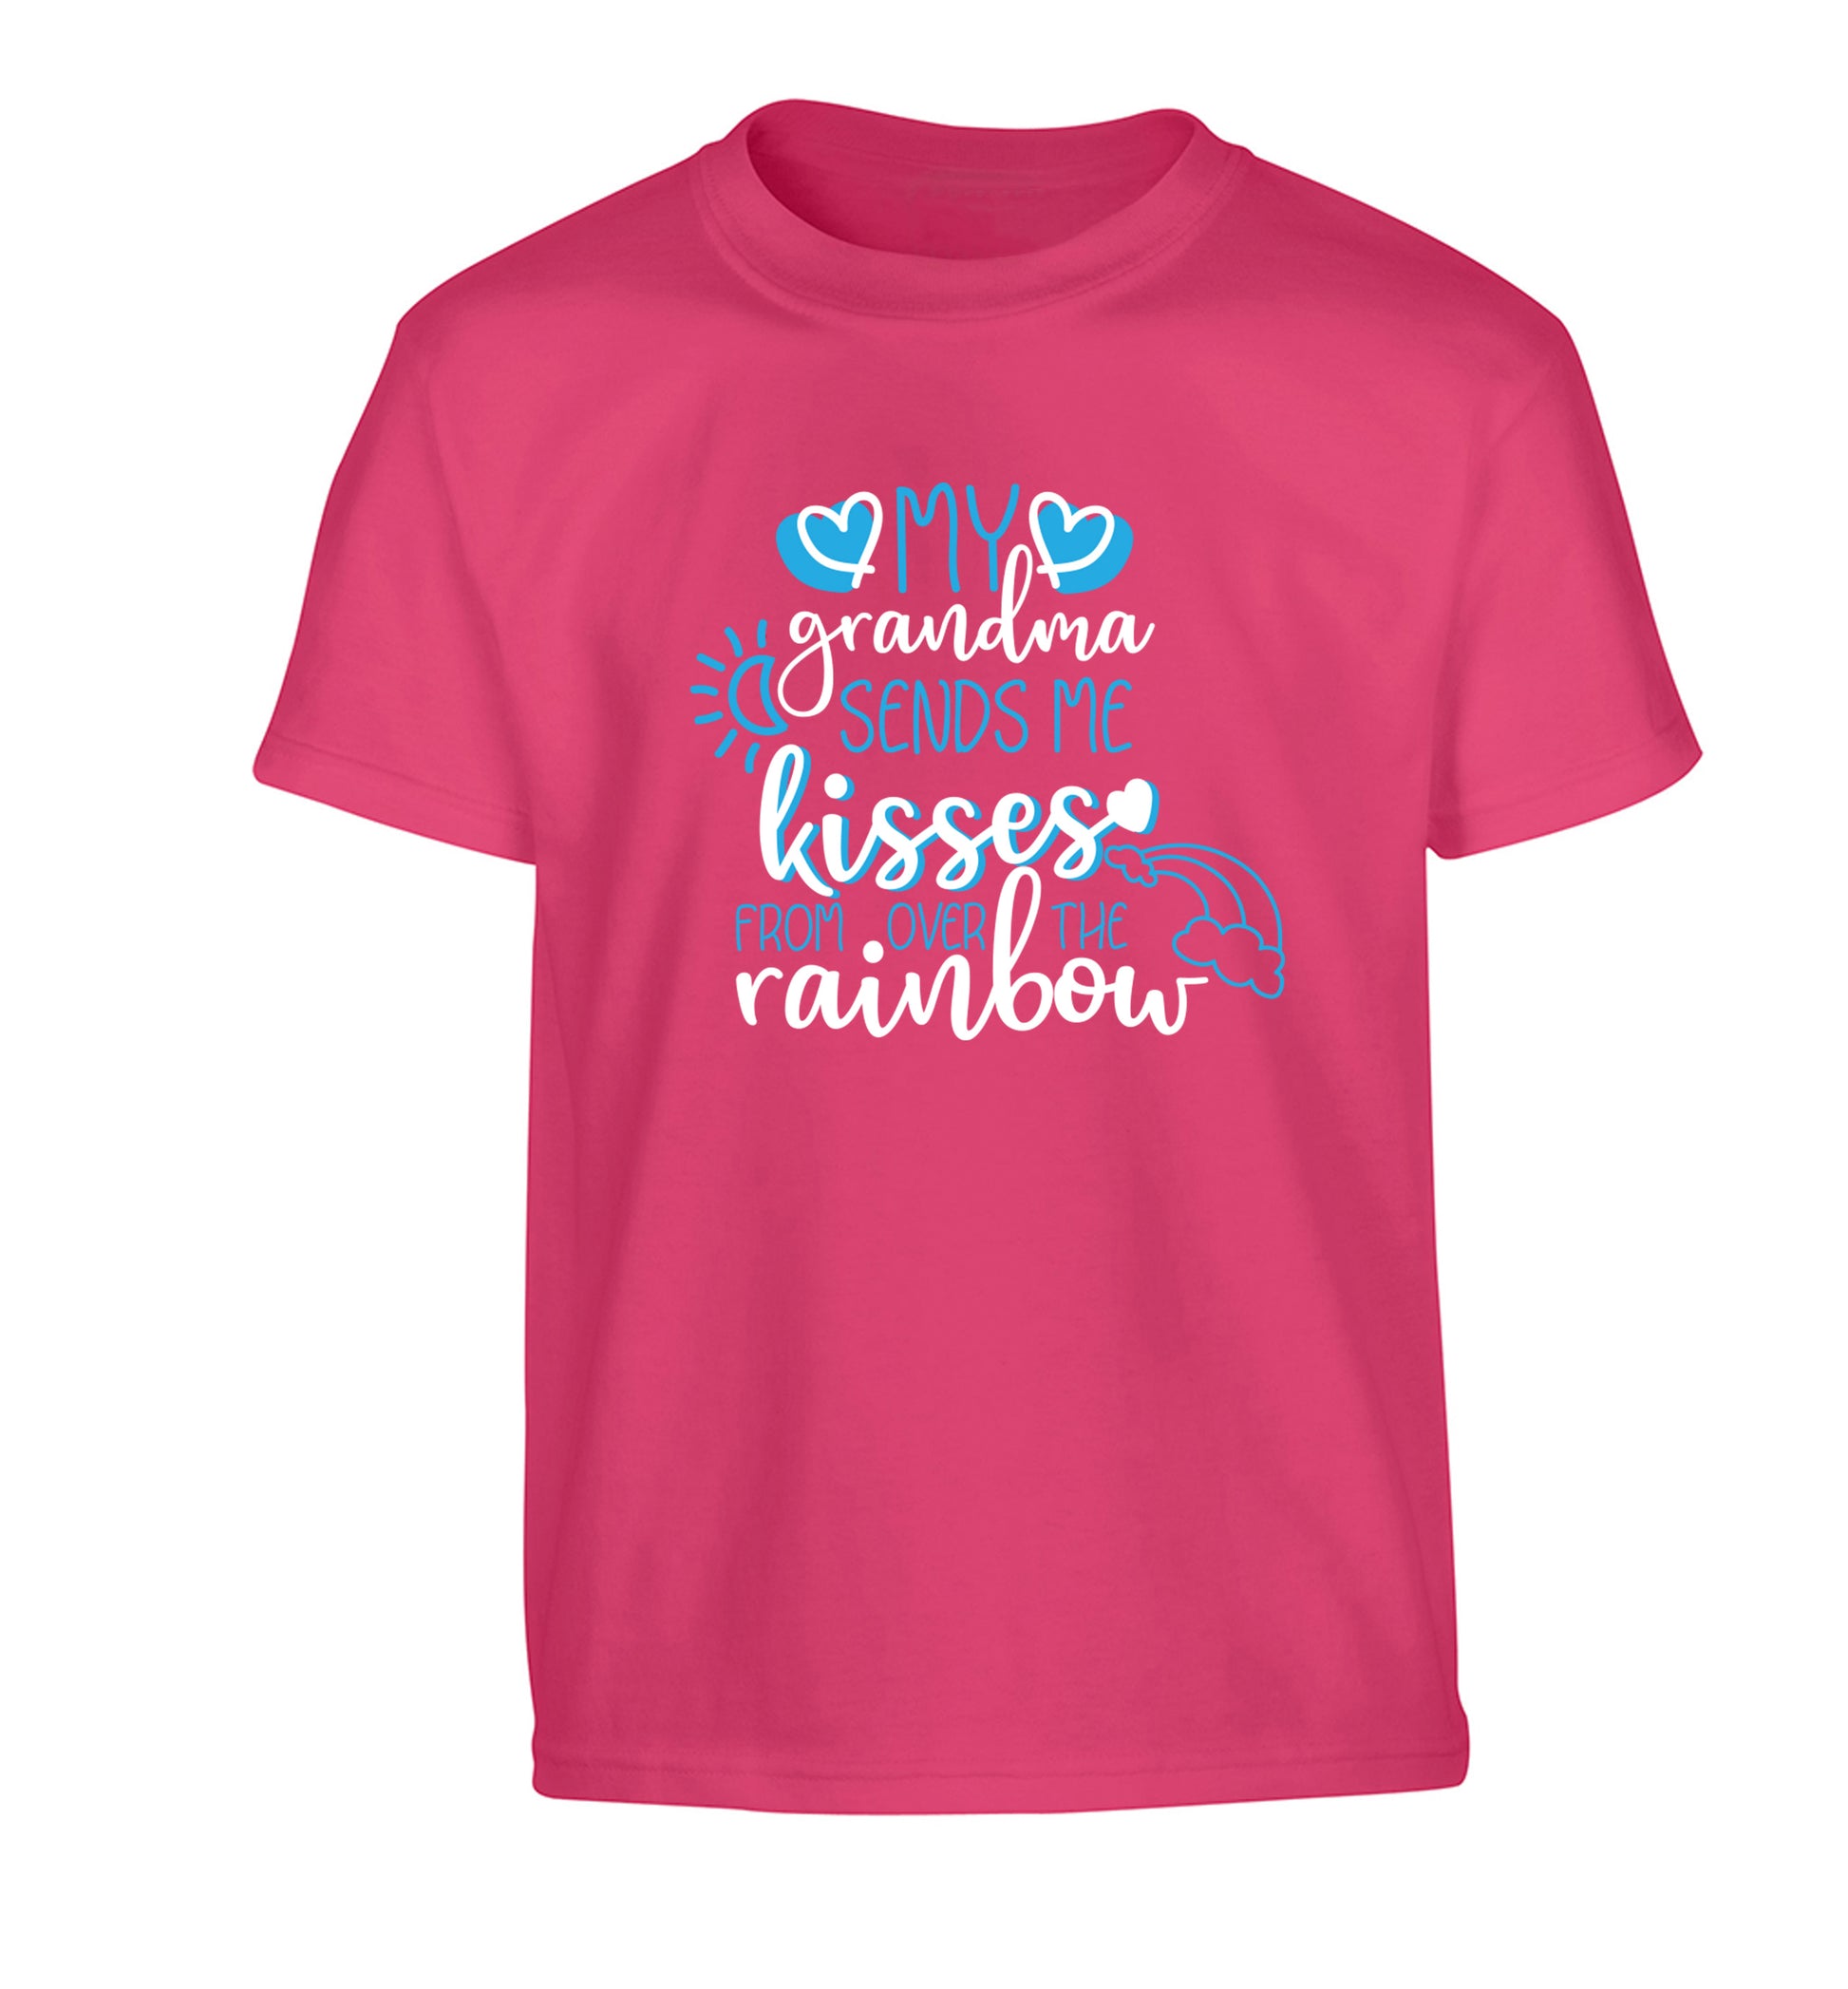 My grandma sends me kisses from over the rainbow Children's pink Tshirt 12-13 Years